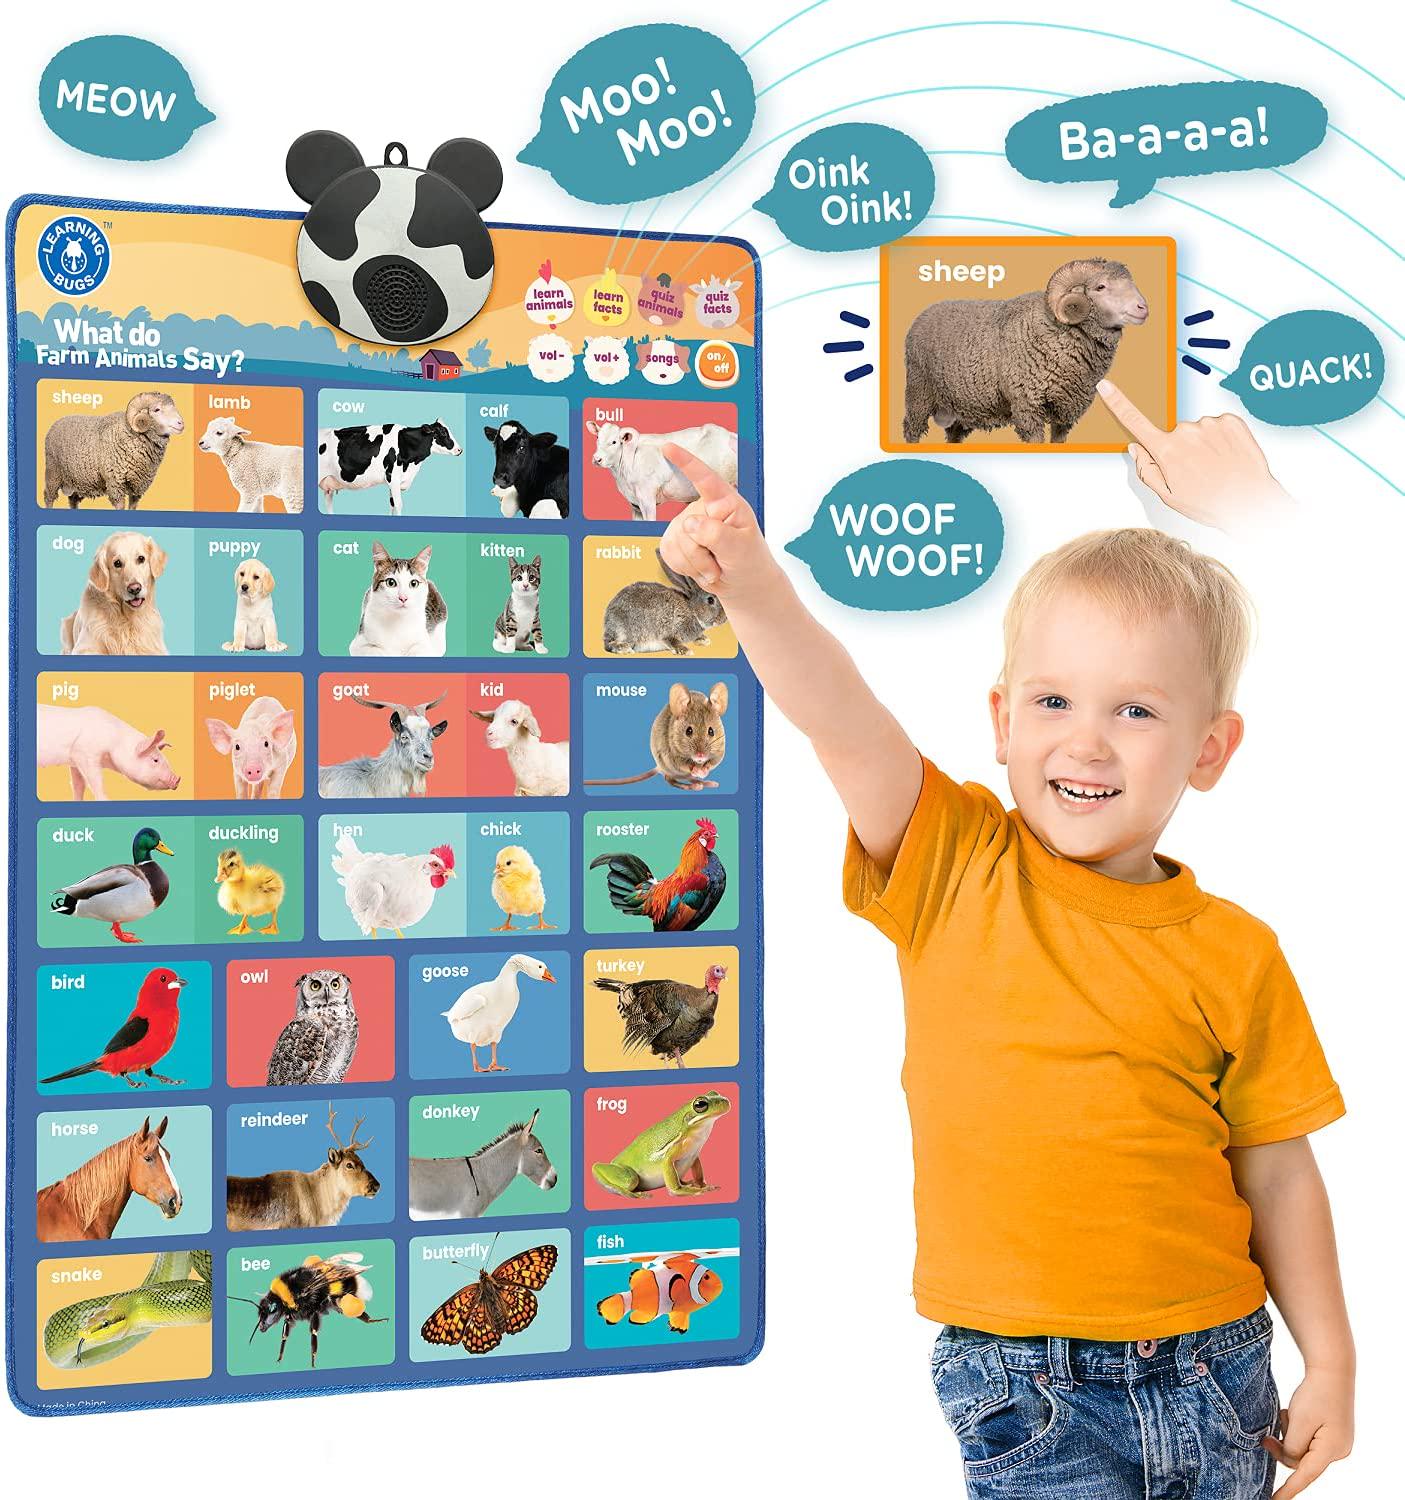 LEARNING BUGS, LEARNING BUGS What do Farm Animals Say, Interactive Educational Farm Animals Poster, Hear 32 Farm Animals Name, Real-Life Sound and Child Friendly Facts for Young Learners Aged 1 to 5 Years Old